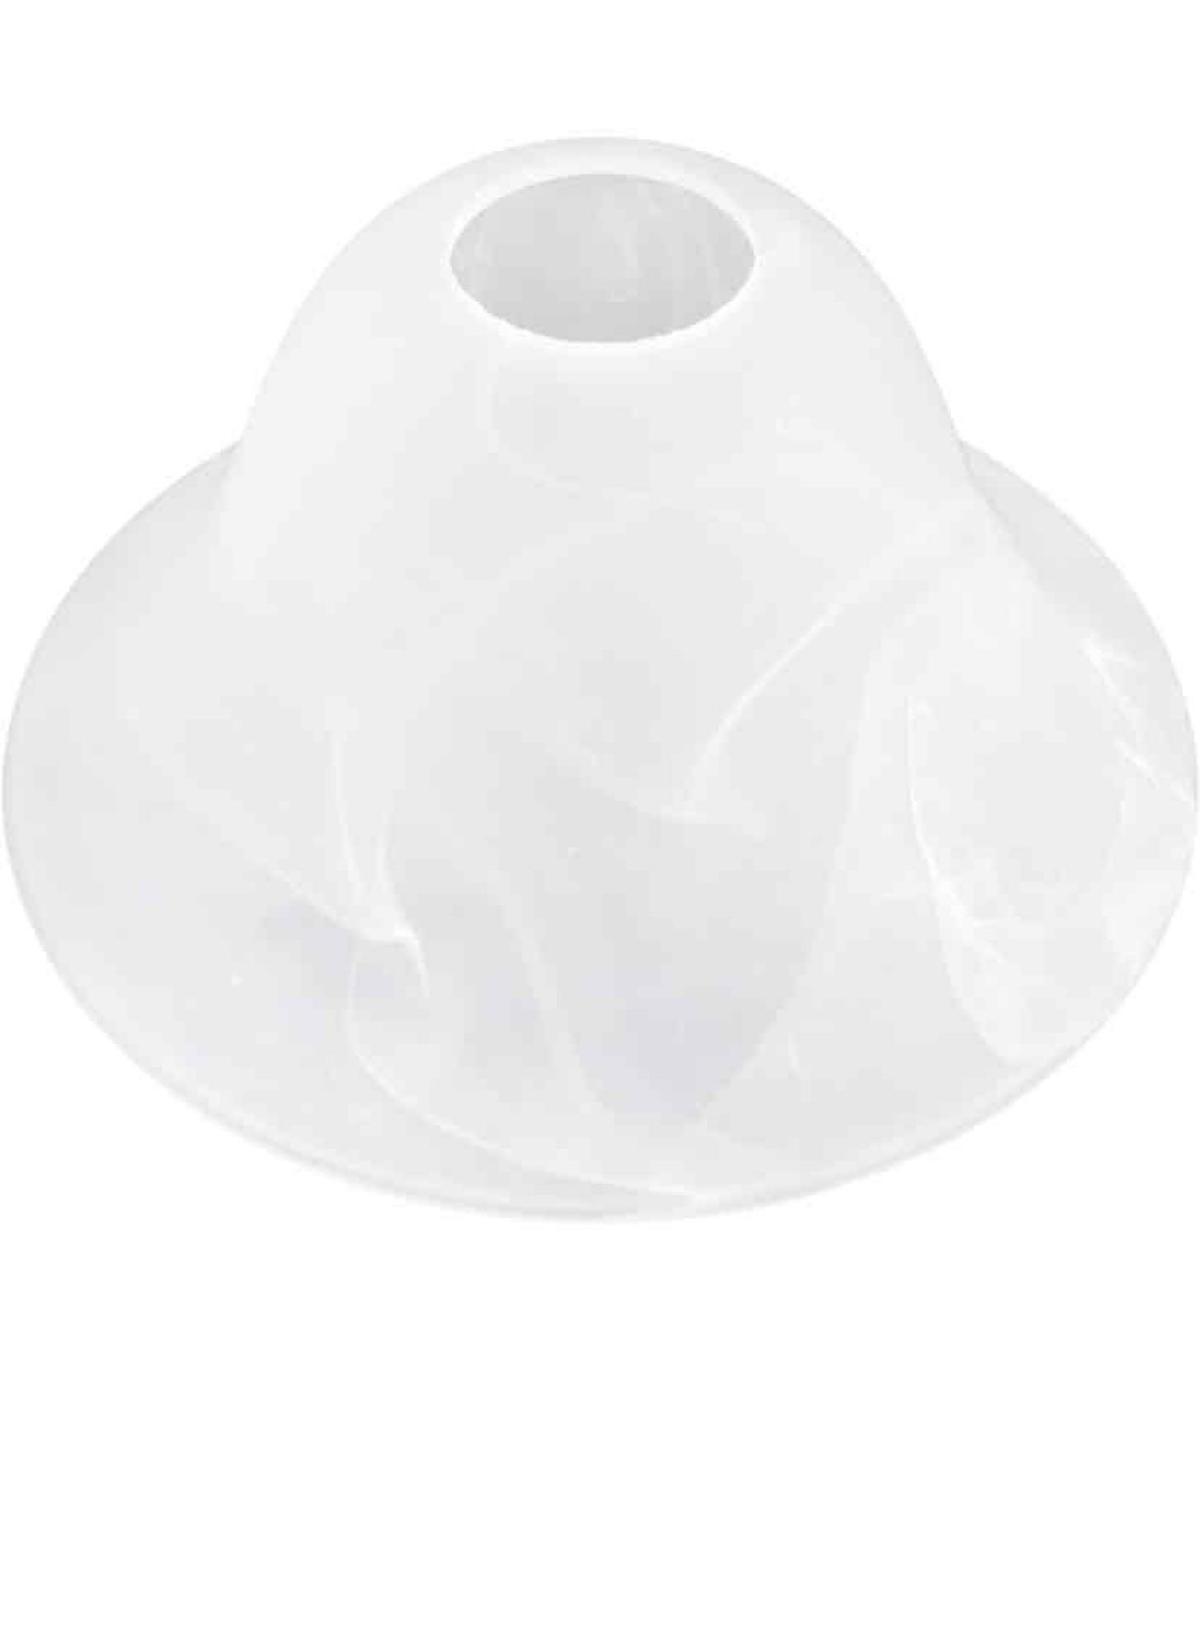 Beaupretty Frosted Glass Lampshade Wall Lamp Lamp Shade Light Covers for Ceiling Lights Pendant Lamp